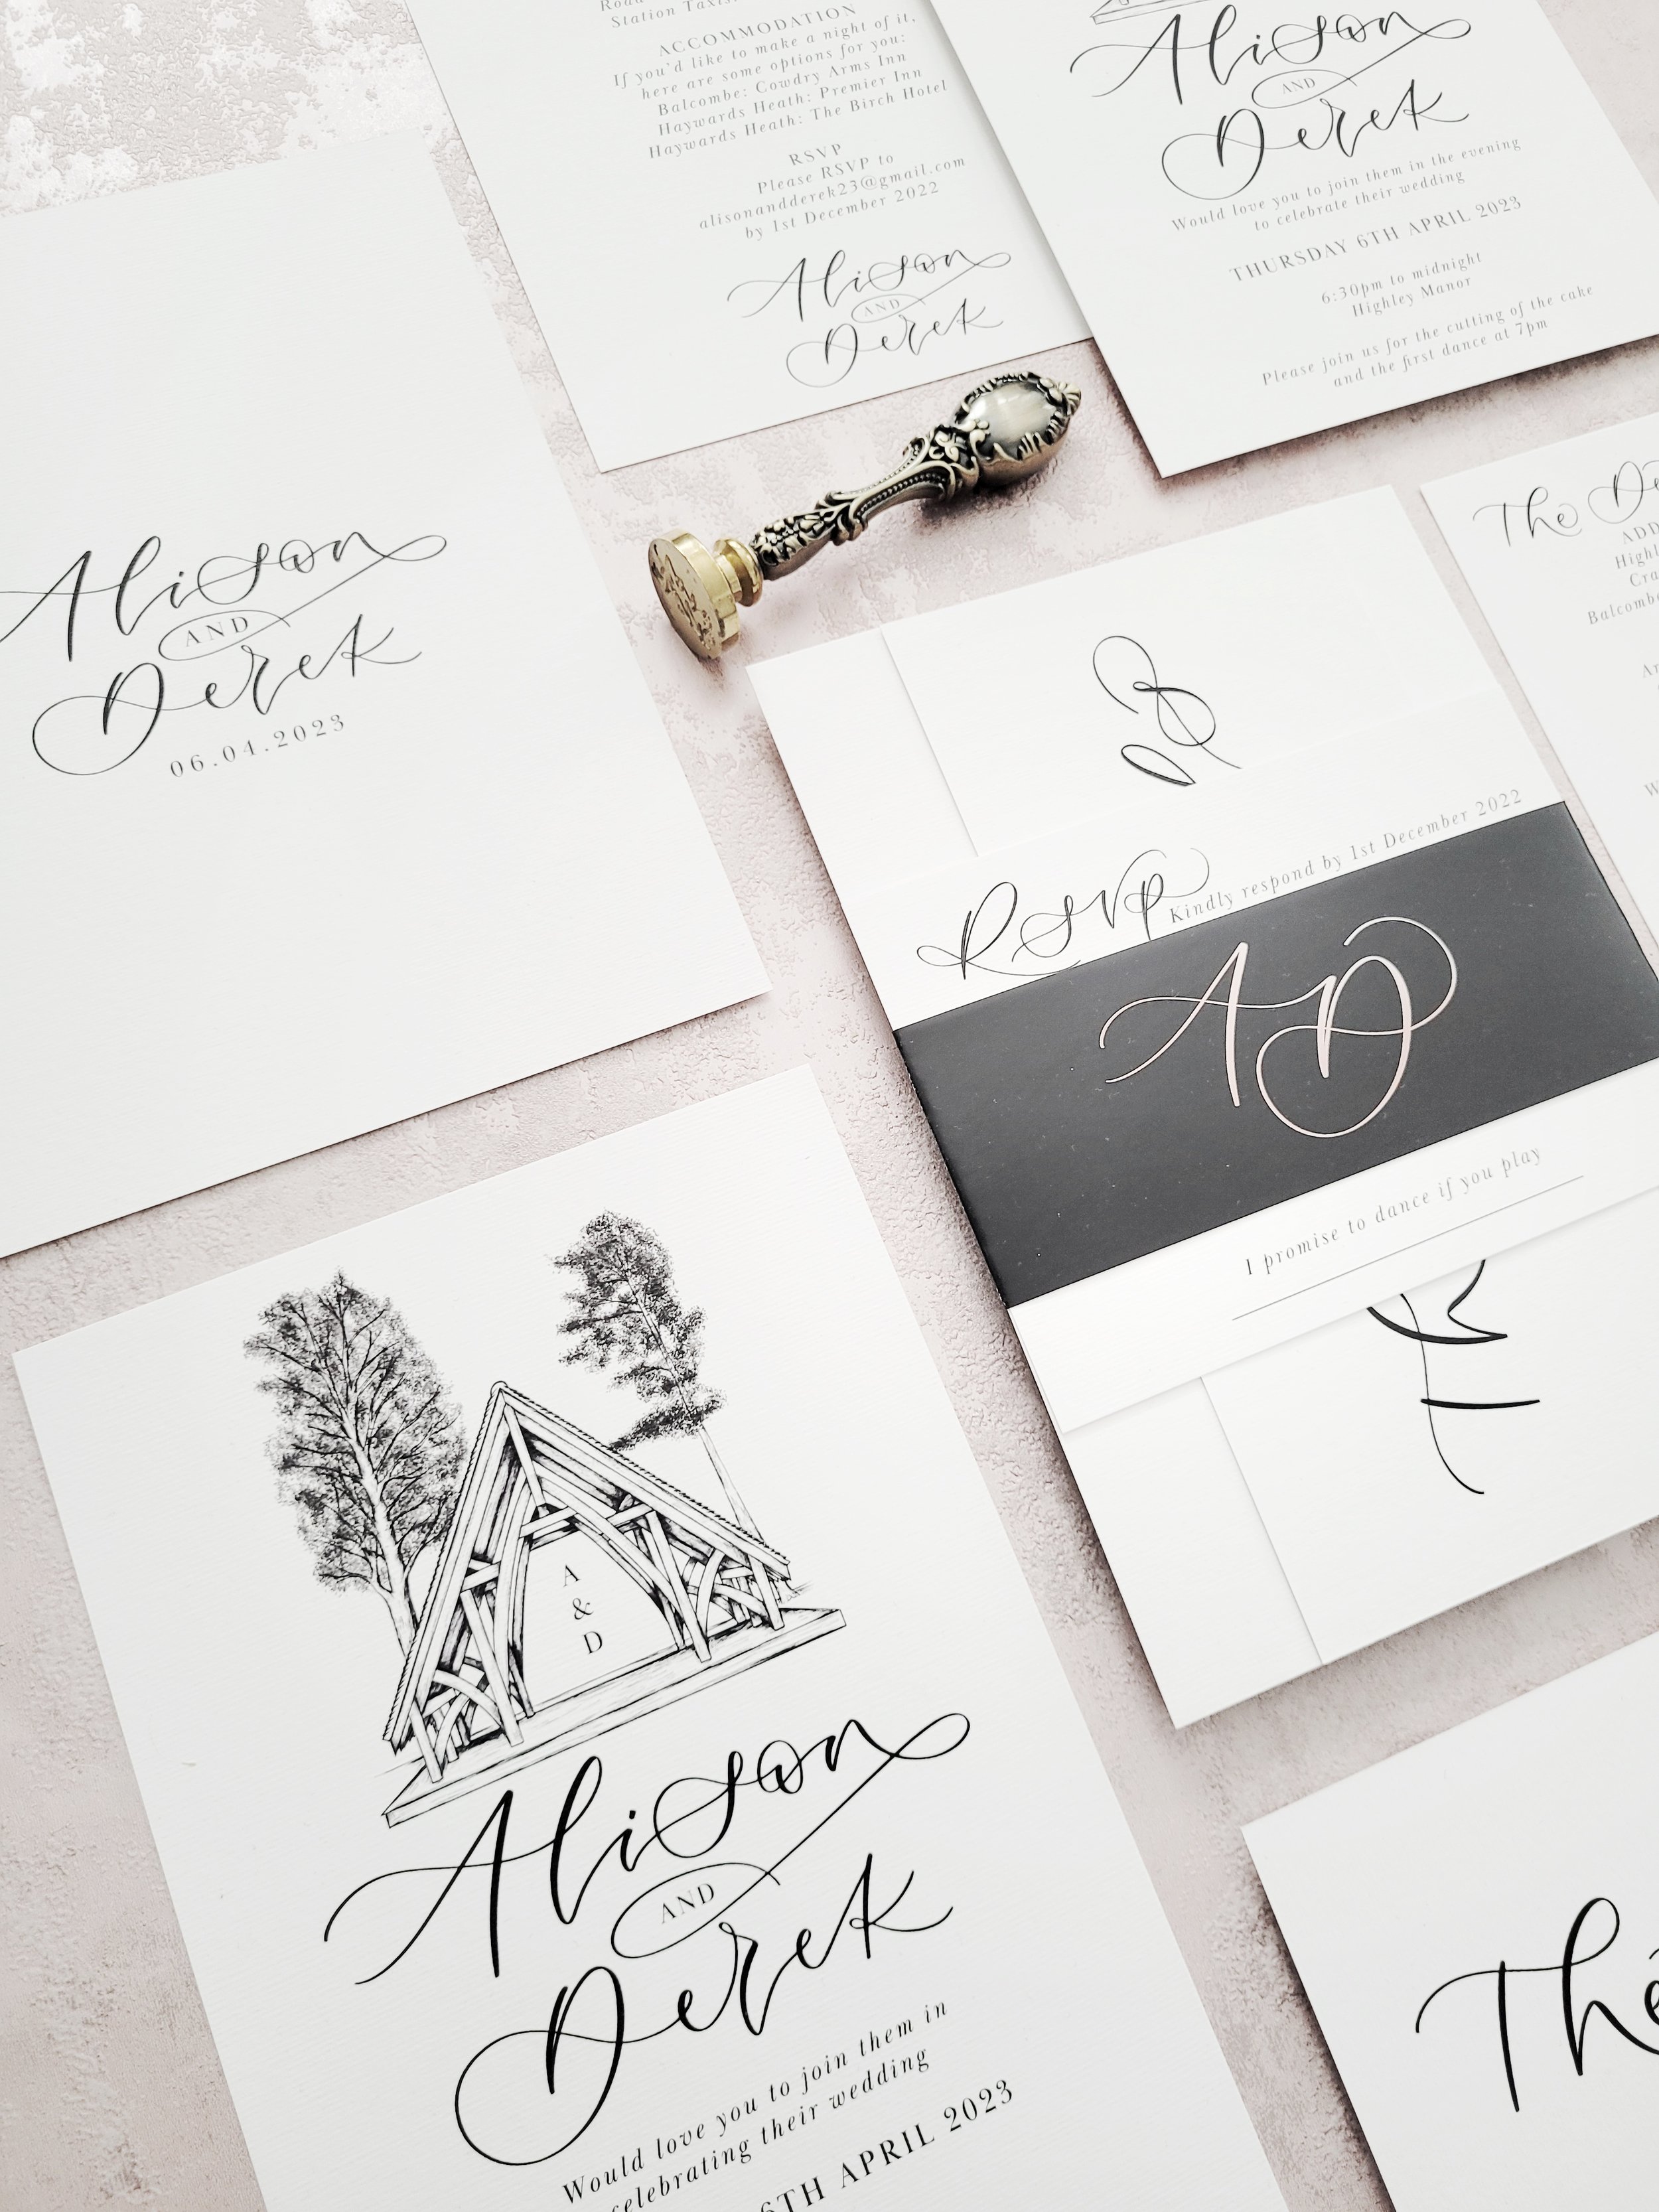 Highley Manor wedding stationery with venue illustration and modern calligraphy - monochrome minimalist invitation set - invitation calligraphy envelope and information details card.jpeg